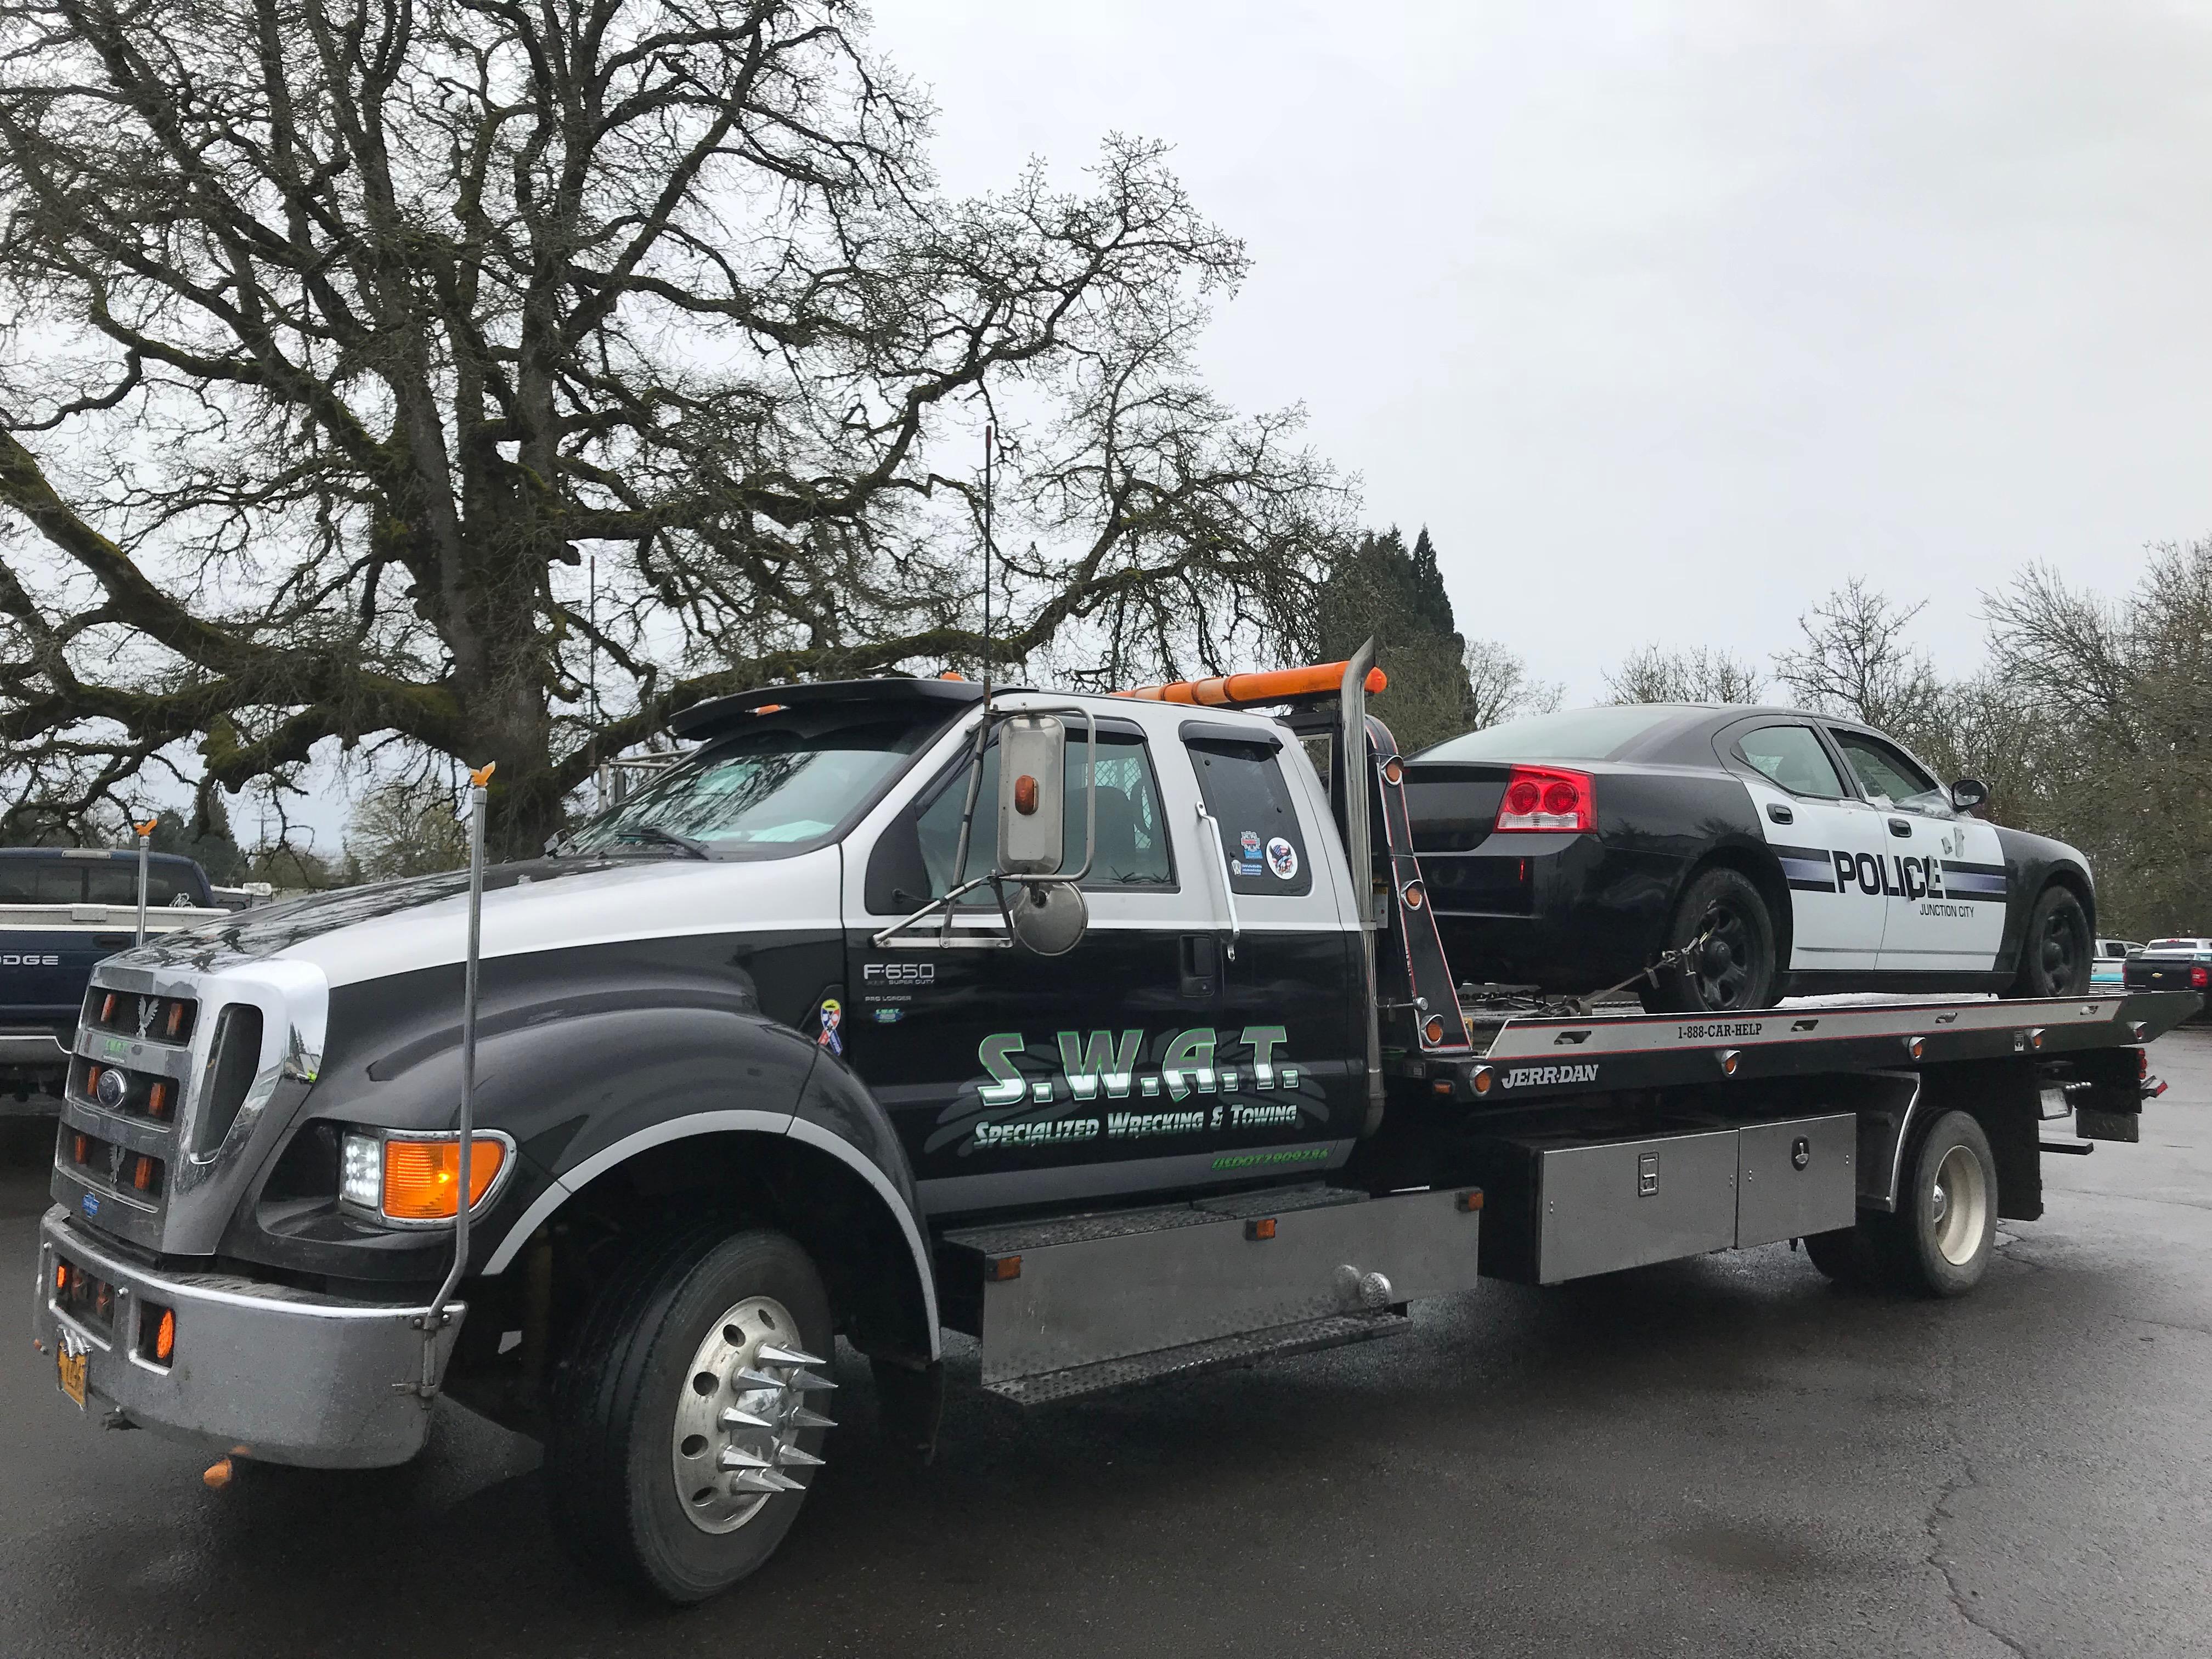 SWAT Specialized Wrecking & Towing Photo